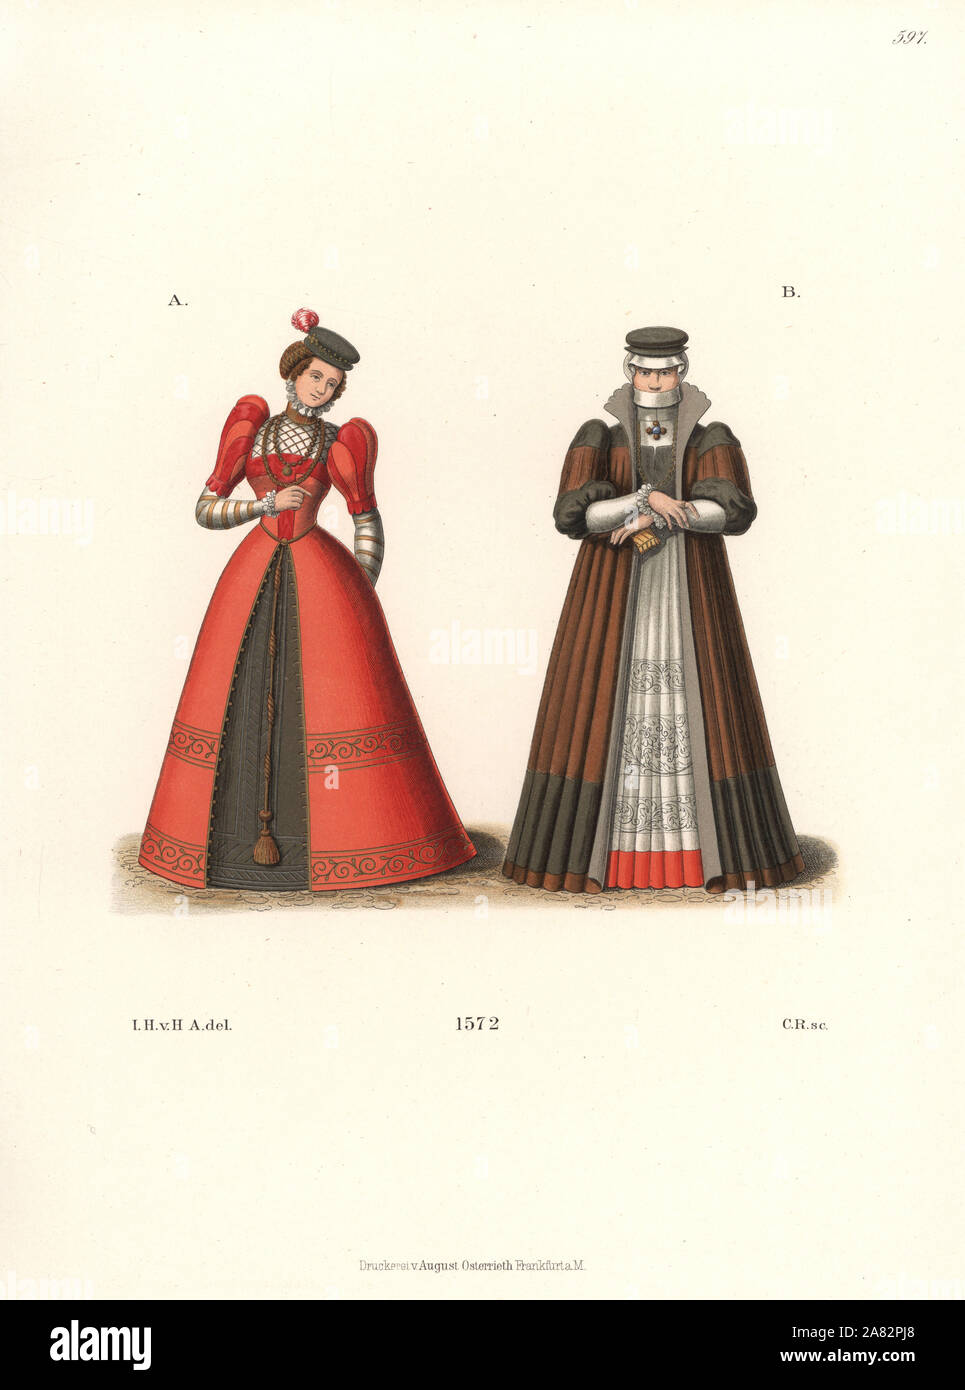 German women in dresses with big shoulder pads, 1572. Young woman in gold hairnet and plumed cap, and doctor's wife in unusual hat and veil that hides the hair, mouth and chin. From miniature enamels in Darmstadt Grand-Ducal Library. Chromolithograph from Hefner-Alteneck's Costumes, Artworks and Appliances from the Middle Ages to the 17th Century, Frankfurt, 1889. Illustration by Dr. Jakob Heinrich von Hefner-Alteneck, lithographed by C. Regnier. Dr. Hefner-Alteneck (1811-1903) was a German museum curator, archaeologist, art historian, illustrator and etcher. Stock Photo